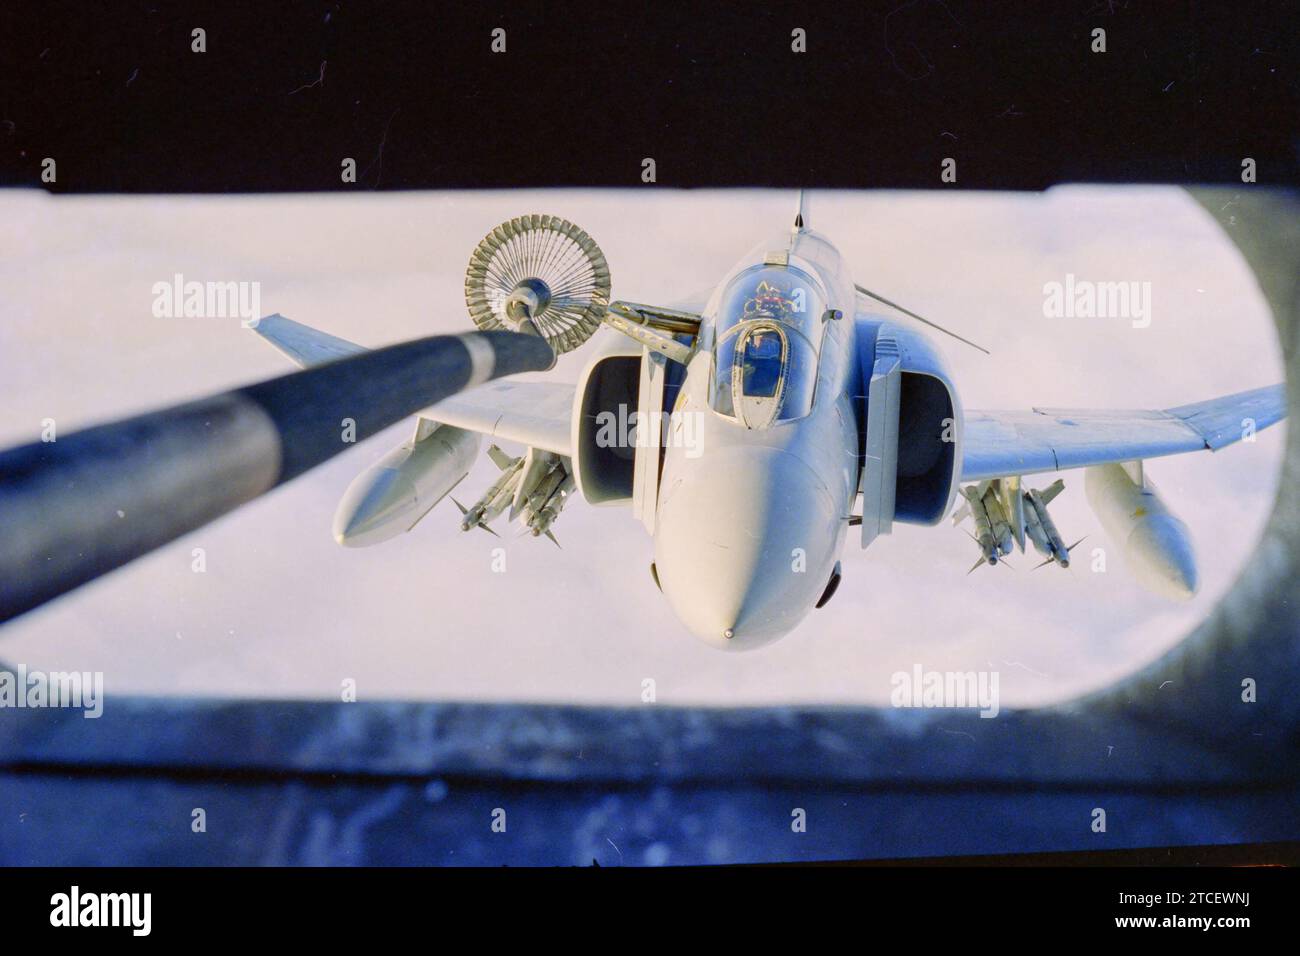 Archival slide scan. Royal Air Force McDonnell Douglas Phantom FGR2 fighter jet, during air to air re-fuelling from a C130 Hercules tanker. 1989 Falkland Islands. Stock Photo